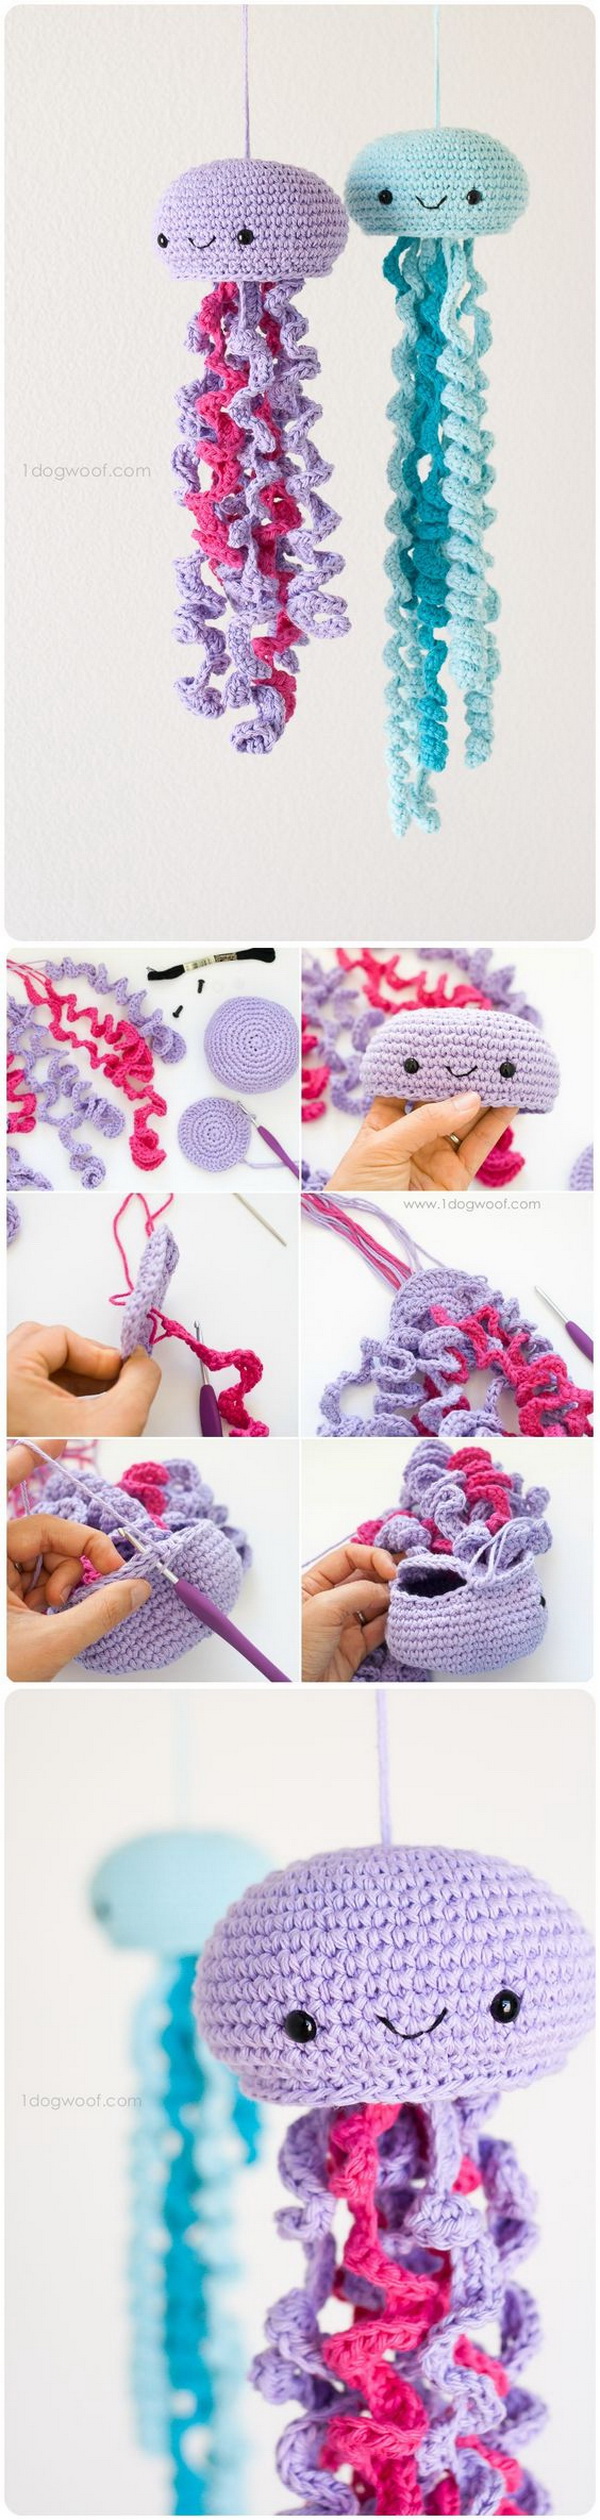 Crochet Amigurumi Jellyfish with Free Pattern. These colorful crochet jellyfish are just adorable and would look great when hanging in your kid's room. Crochet your own happy jellyfish inspired by this tutorial! 